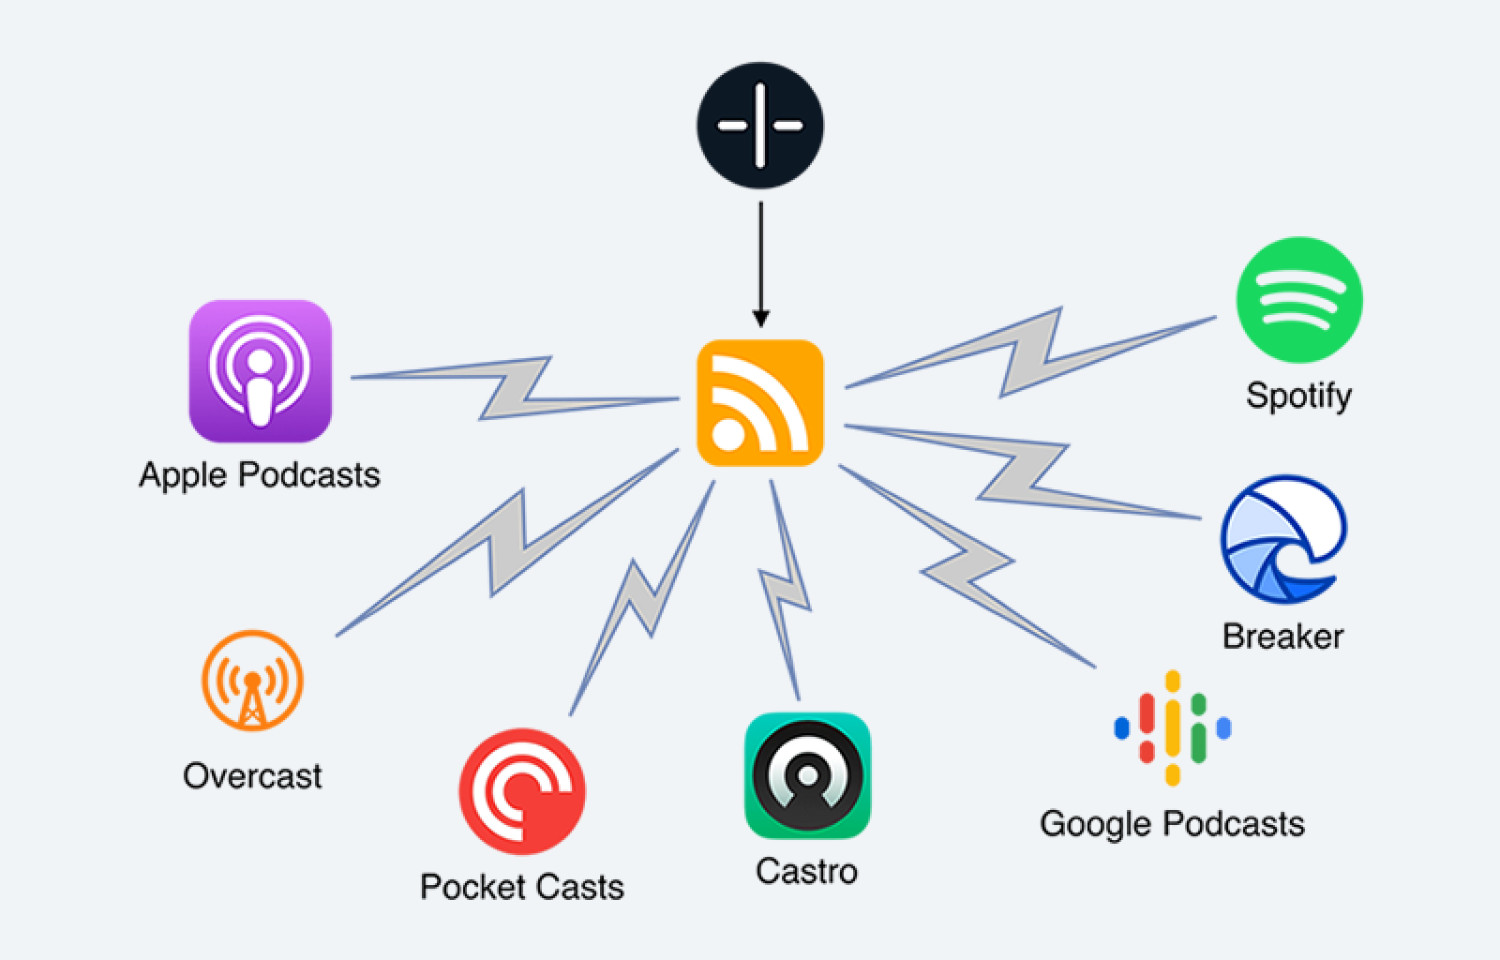 Image showing how your rss feed is distributed